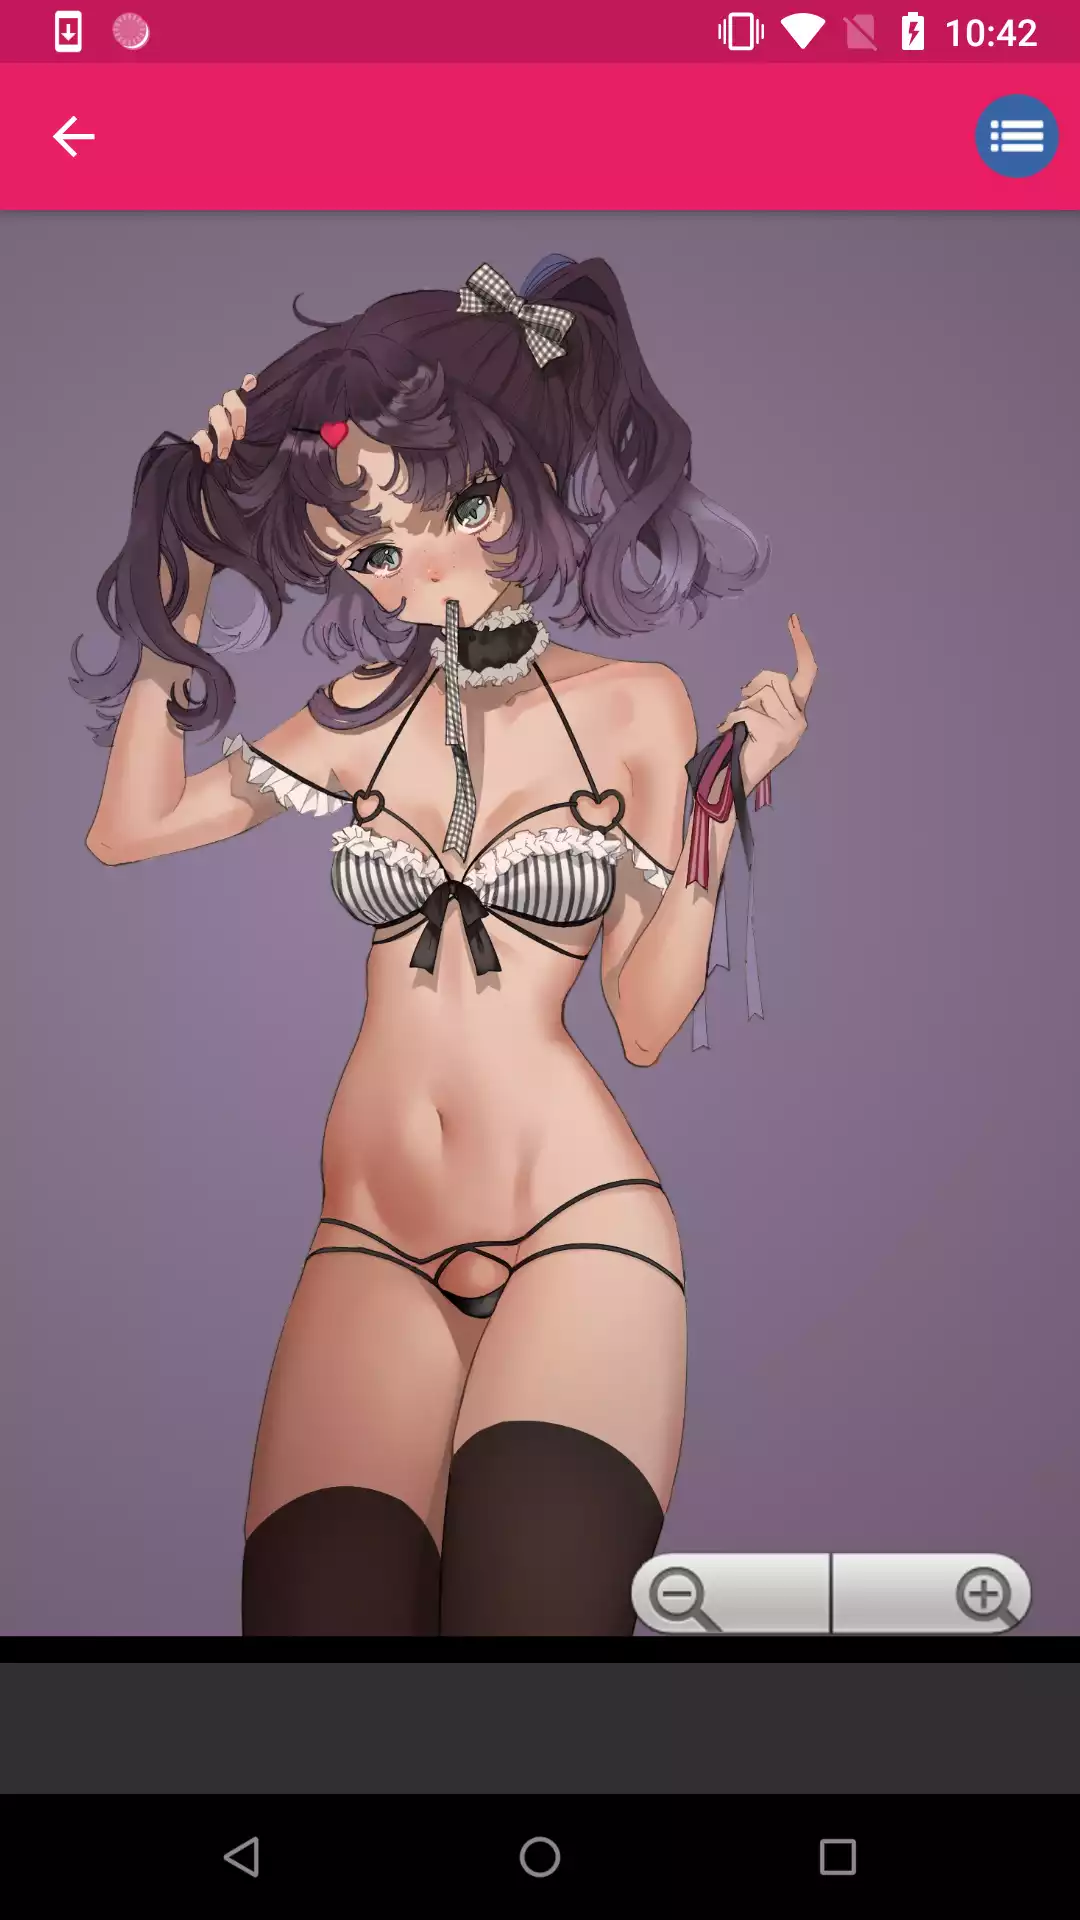 Sexy Anime Girls Wallpapers cosplay,girls,pictures,anime,girl,pornstar,hantai,sexy,offline,shrinking,backgrounds,hot,galleries,screensaver,apk,pic,porn,hentai,photo,download,dreams,wallpapers,pics